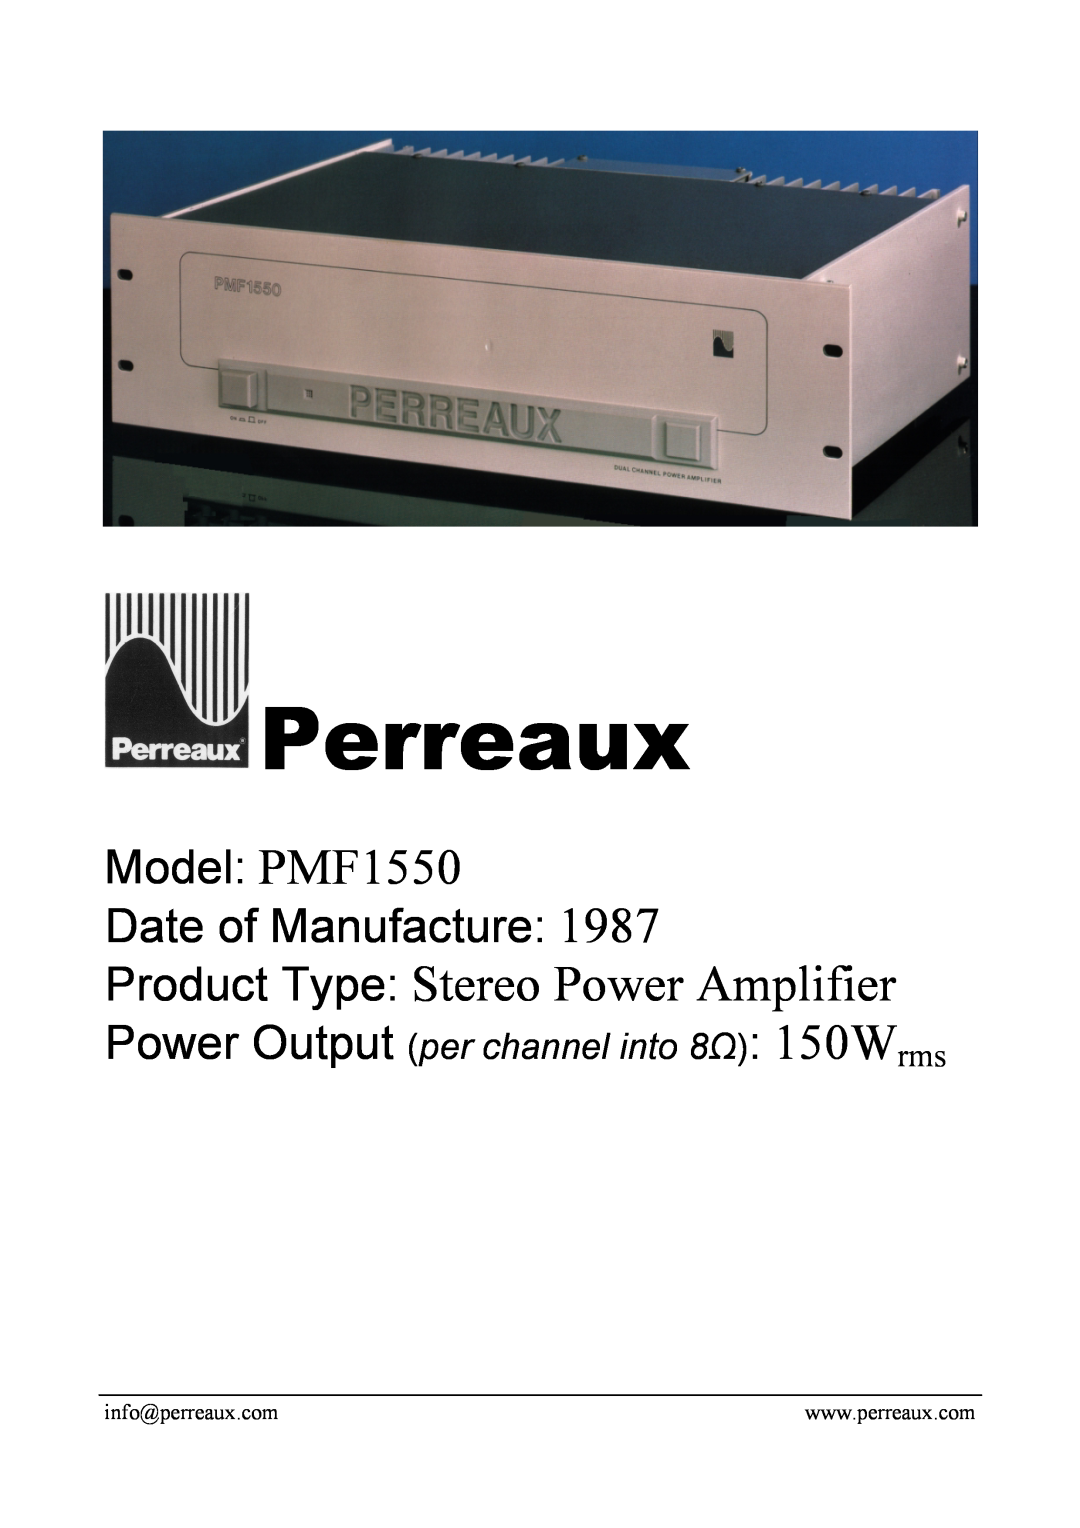 Perreaux manual Perreaux, Product Type Stereo Power Amplifier, Model PMF1550 Date of Manufacture 